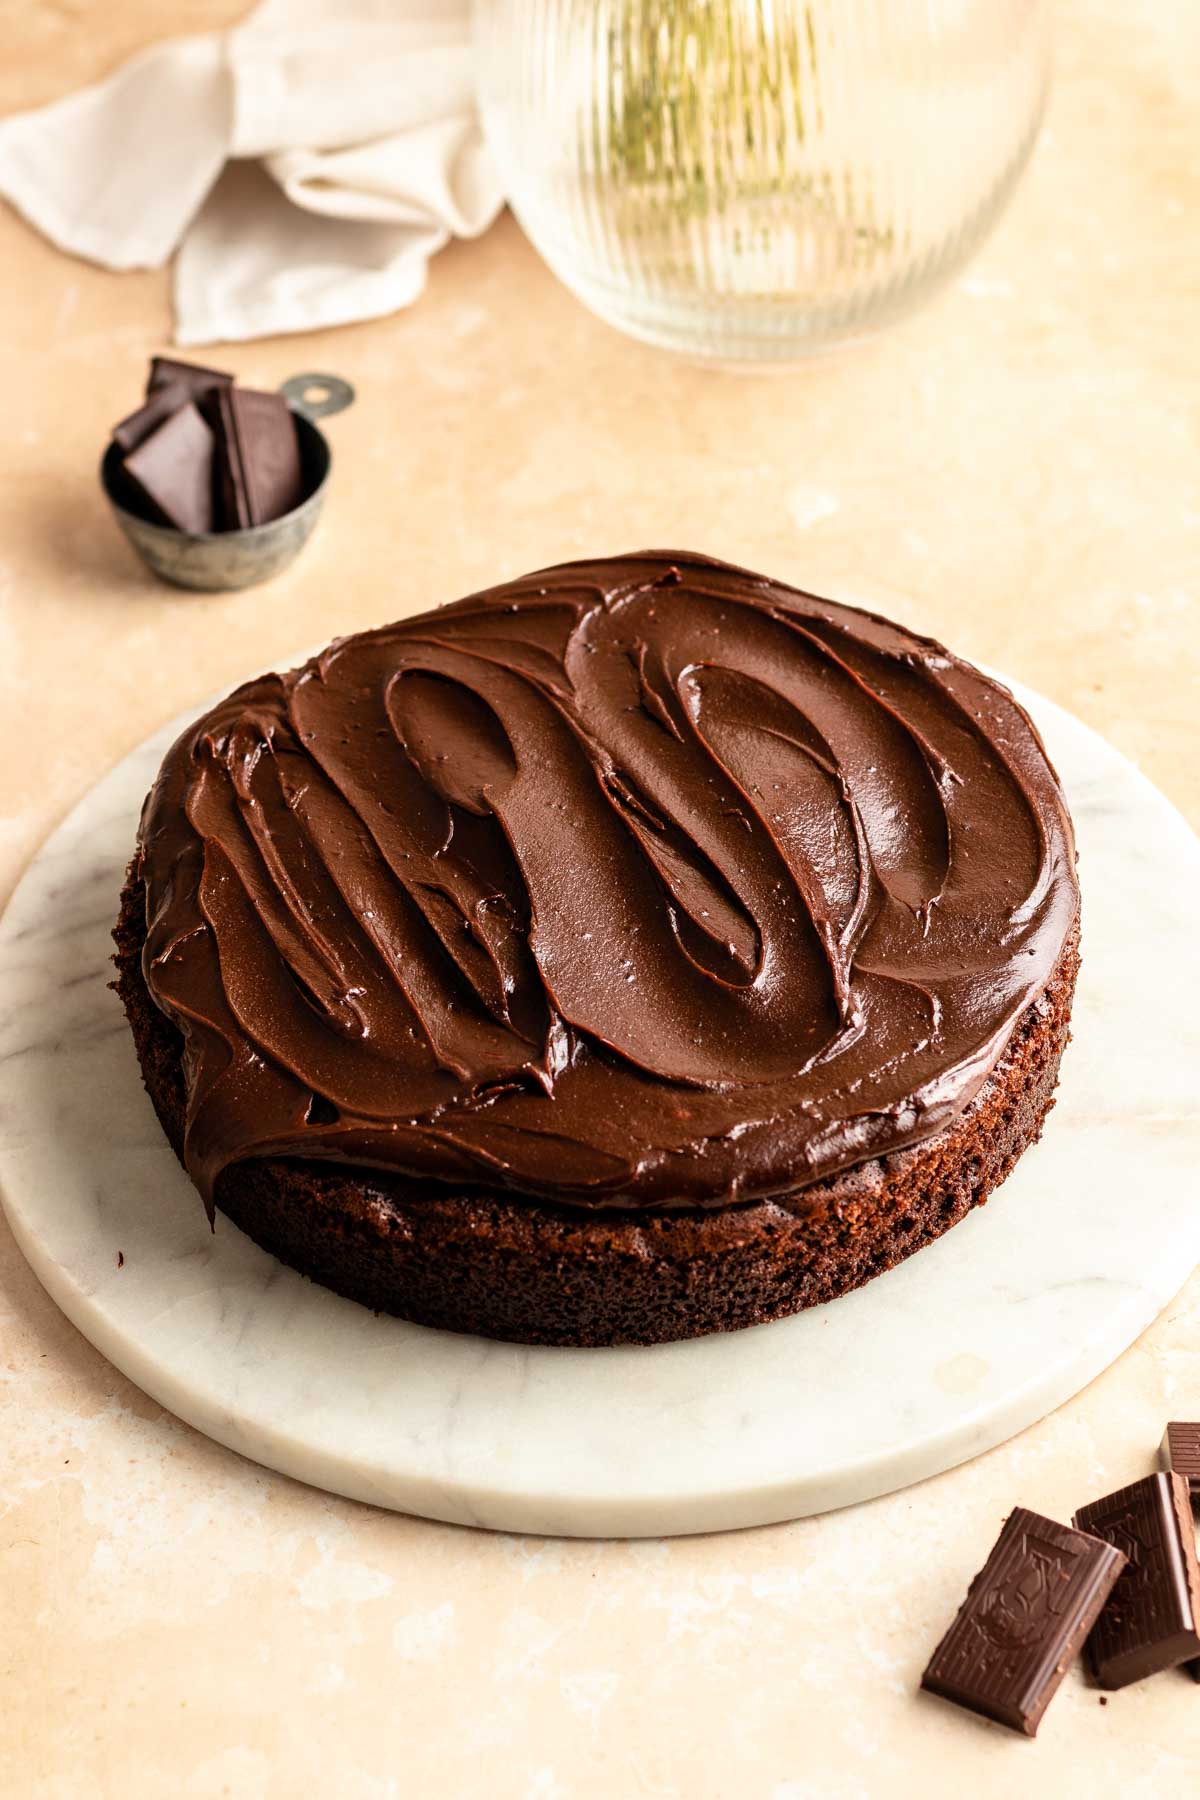 One layer of chocolate cake with chocolate fudge frosting.